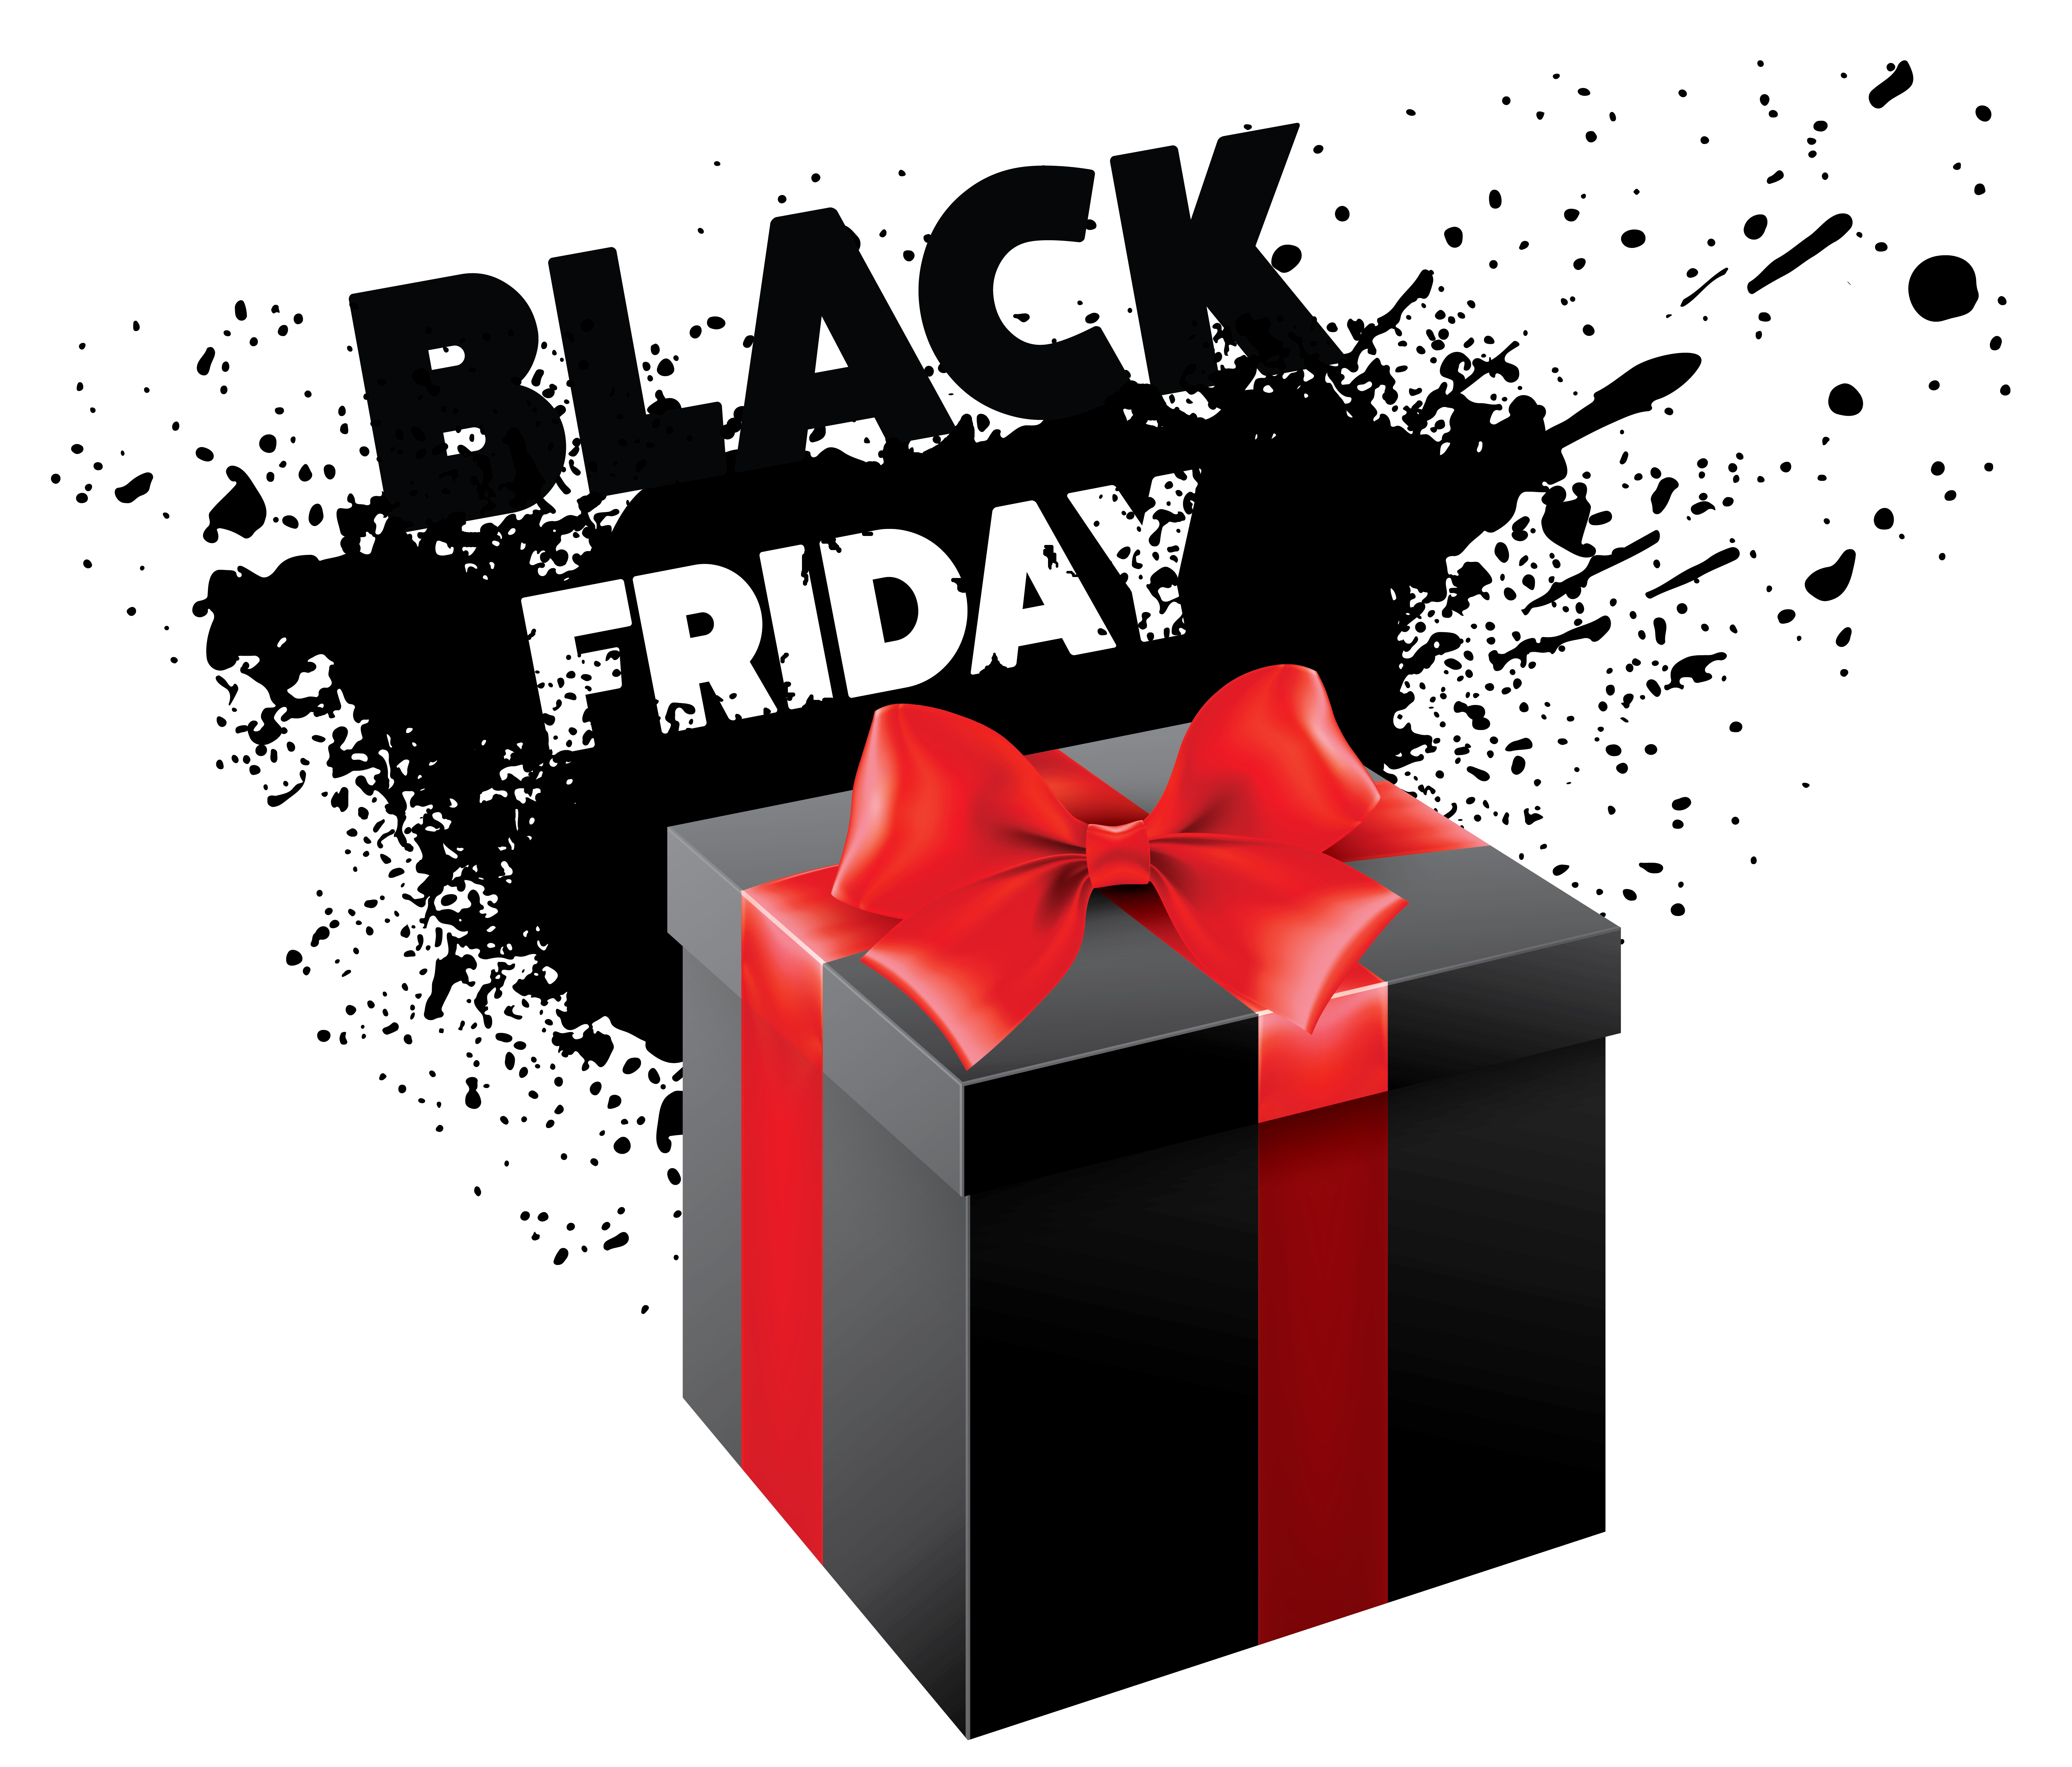 Black friday clip art clipart free download.